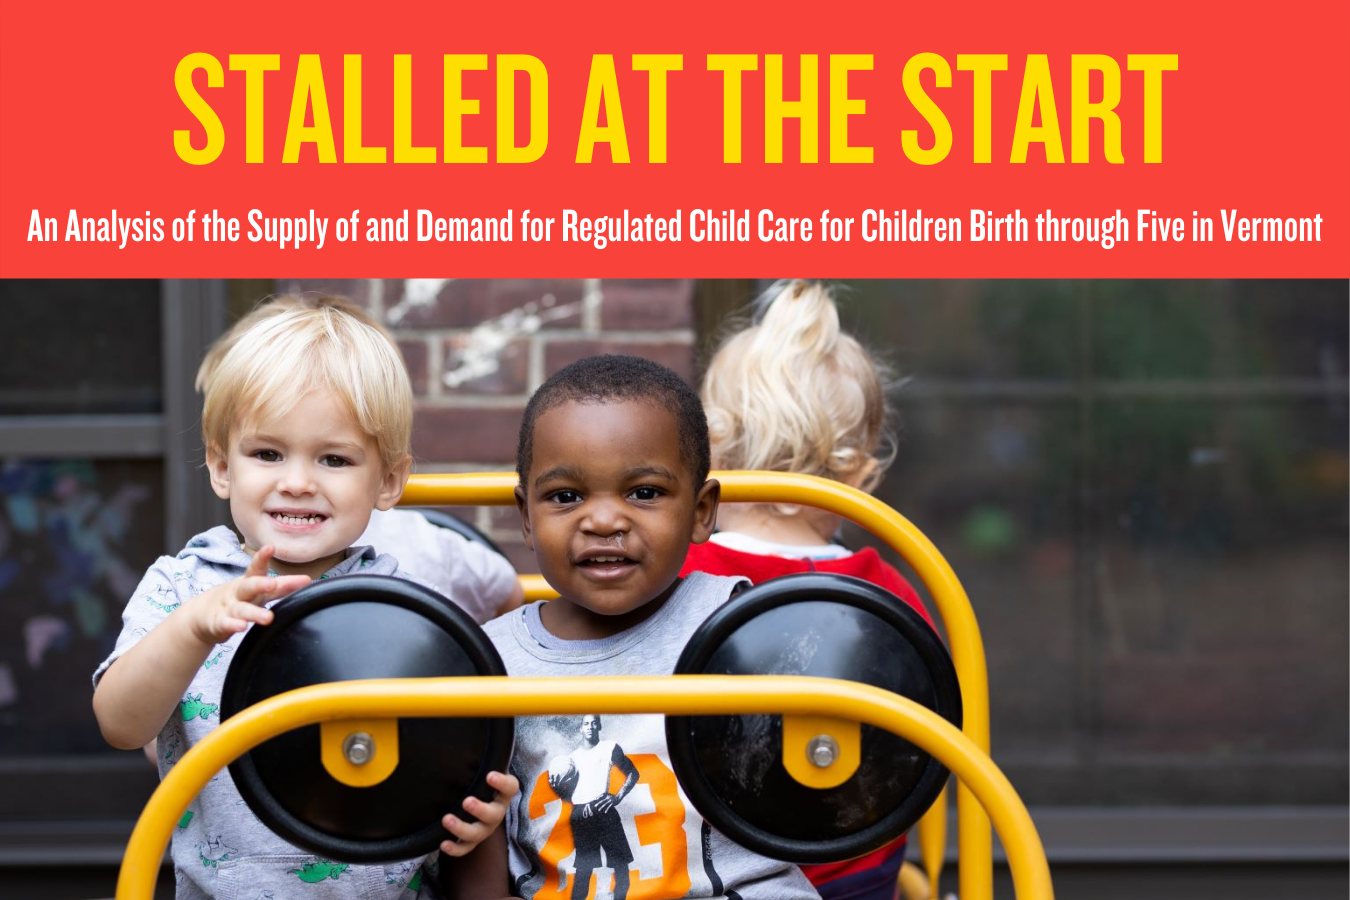 Blog: New report confirms Vermont’s ongoing child care crisis, highlights progress for infants and toddlers